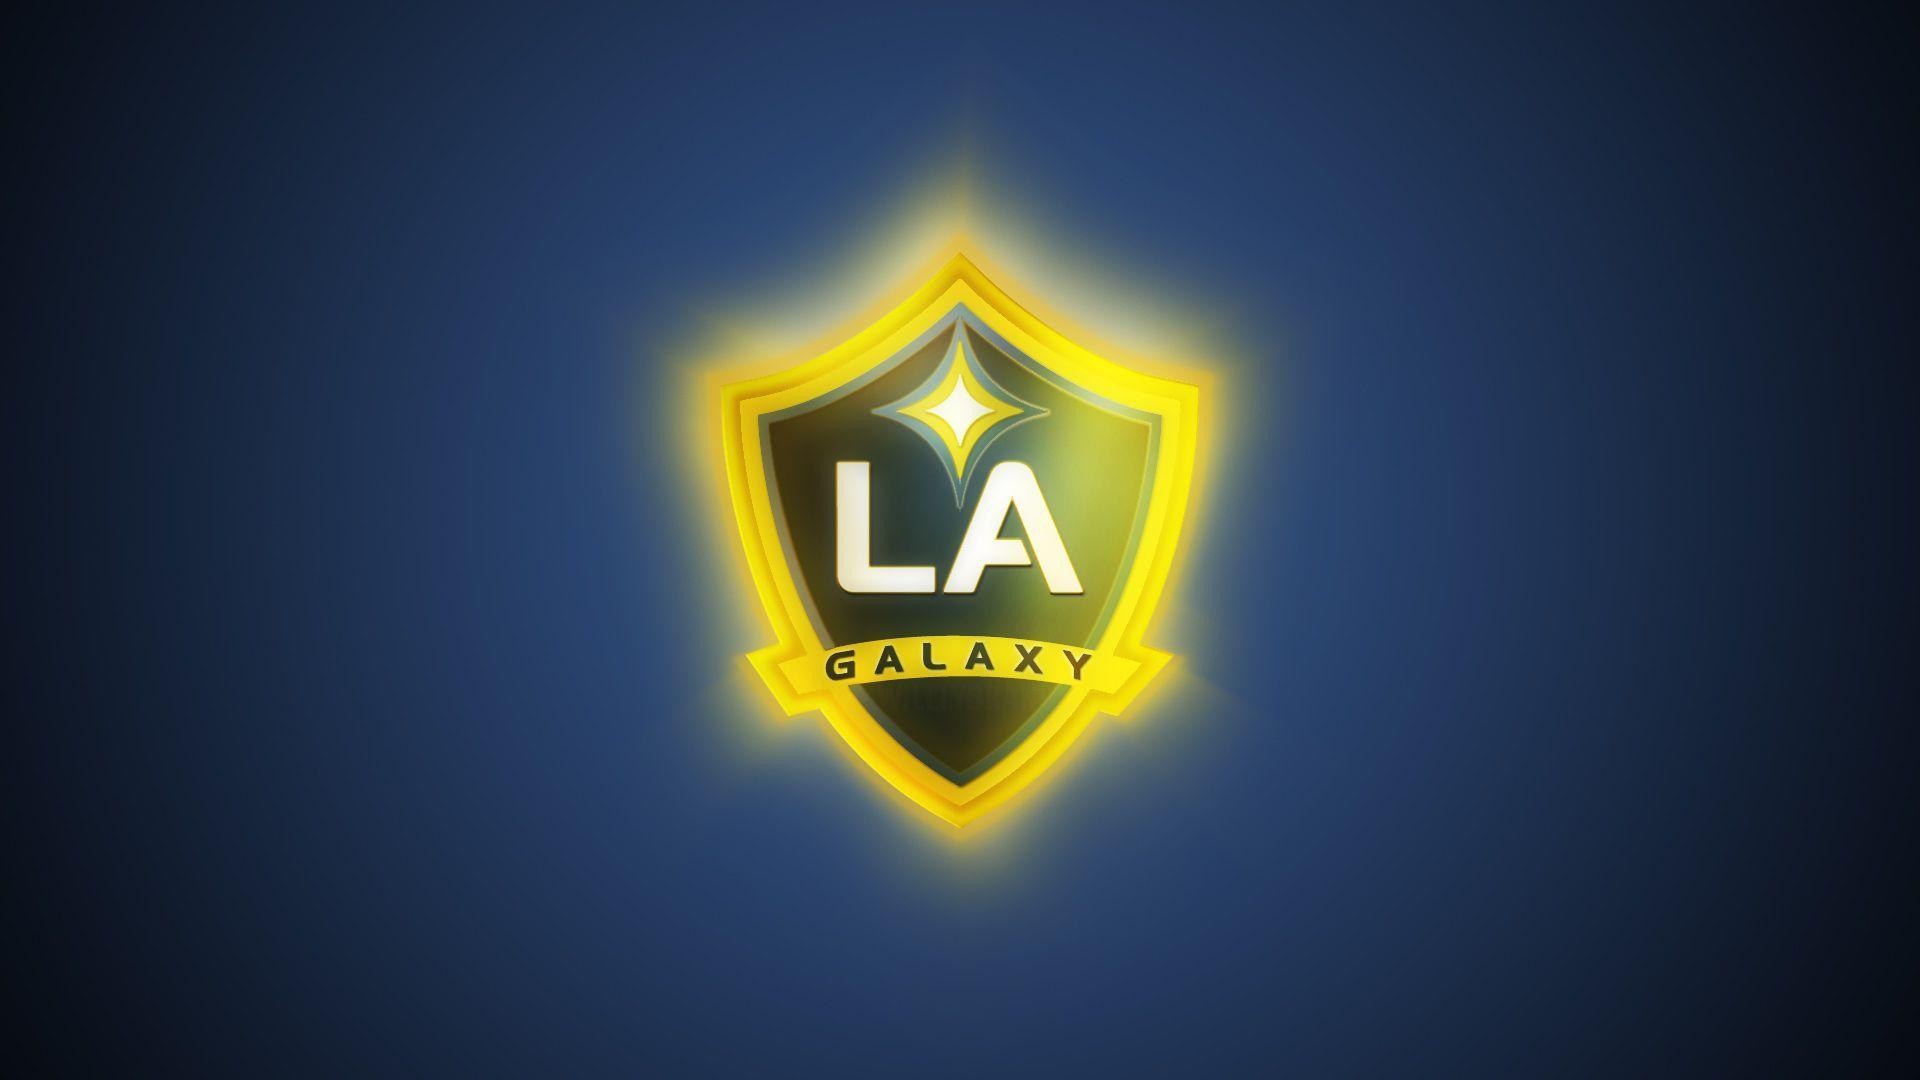 HD Backgrounds Los Angeles Galaxy With high-resolution 1920X1080 pixel. You can use this wallpaper for your Desktop Computers, Mac Screensavers, Windows Backgrounds, iPhone Wallpapers, Tablet or Android Lock screen and another Mobile device